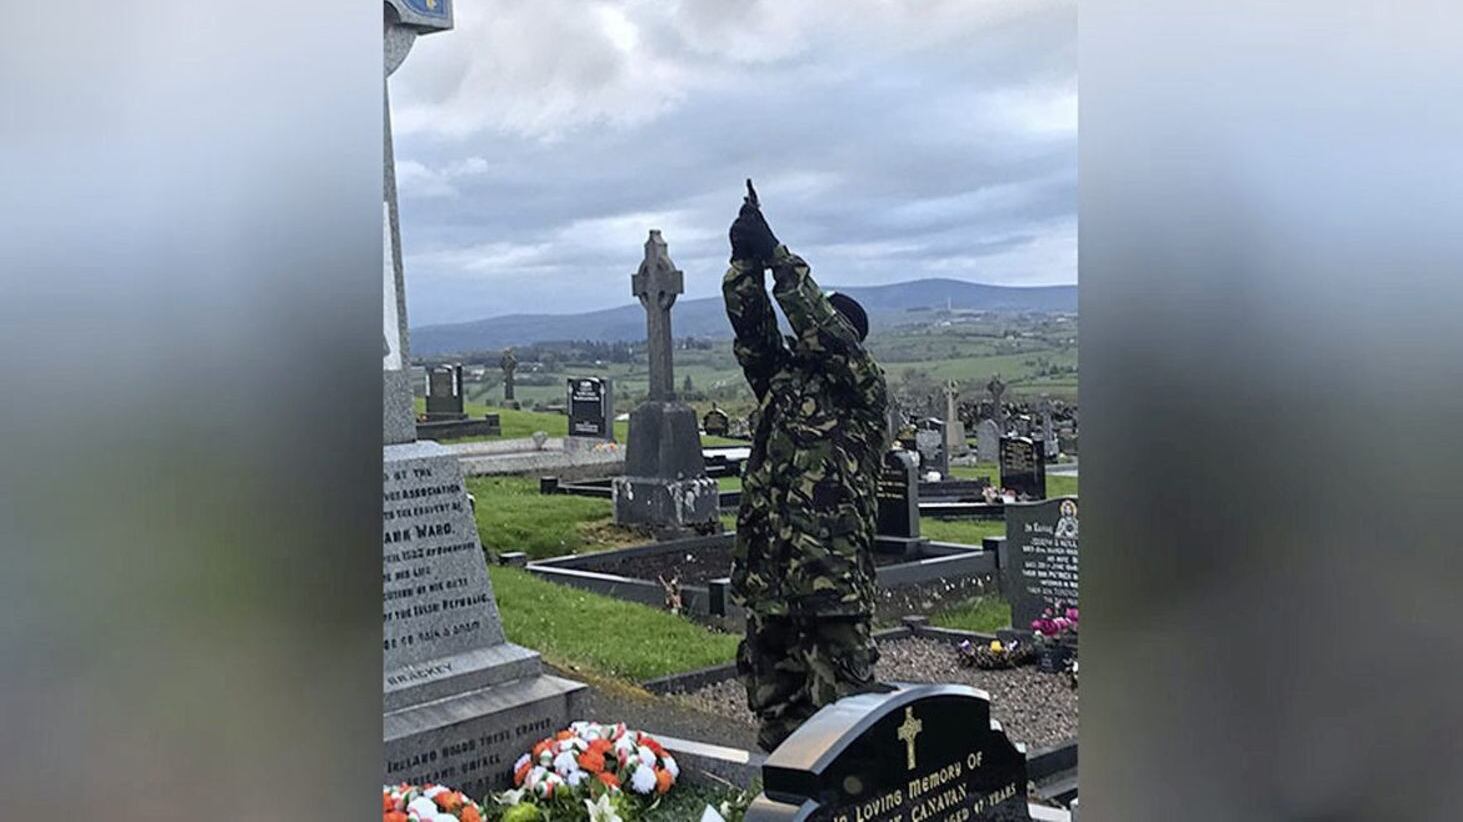 What is believed to be a masked member of the Continuity IRA firing shots over a grave in Co Tyrone on Easter Saturday  